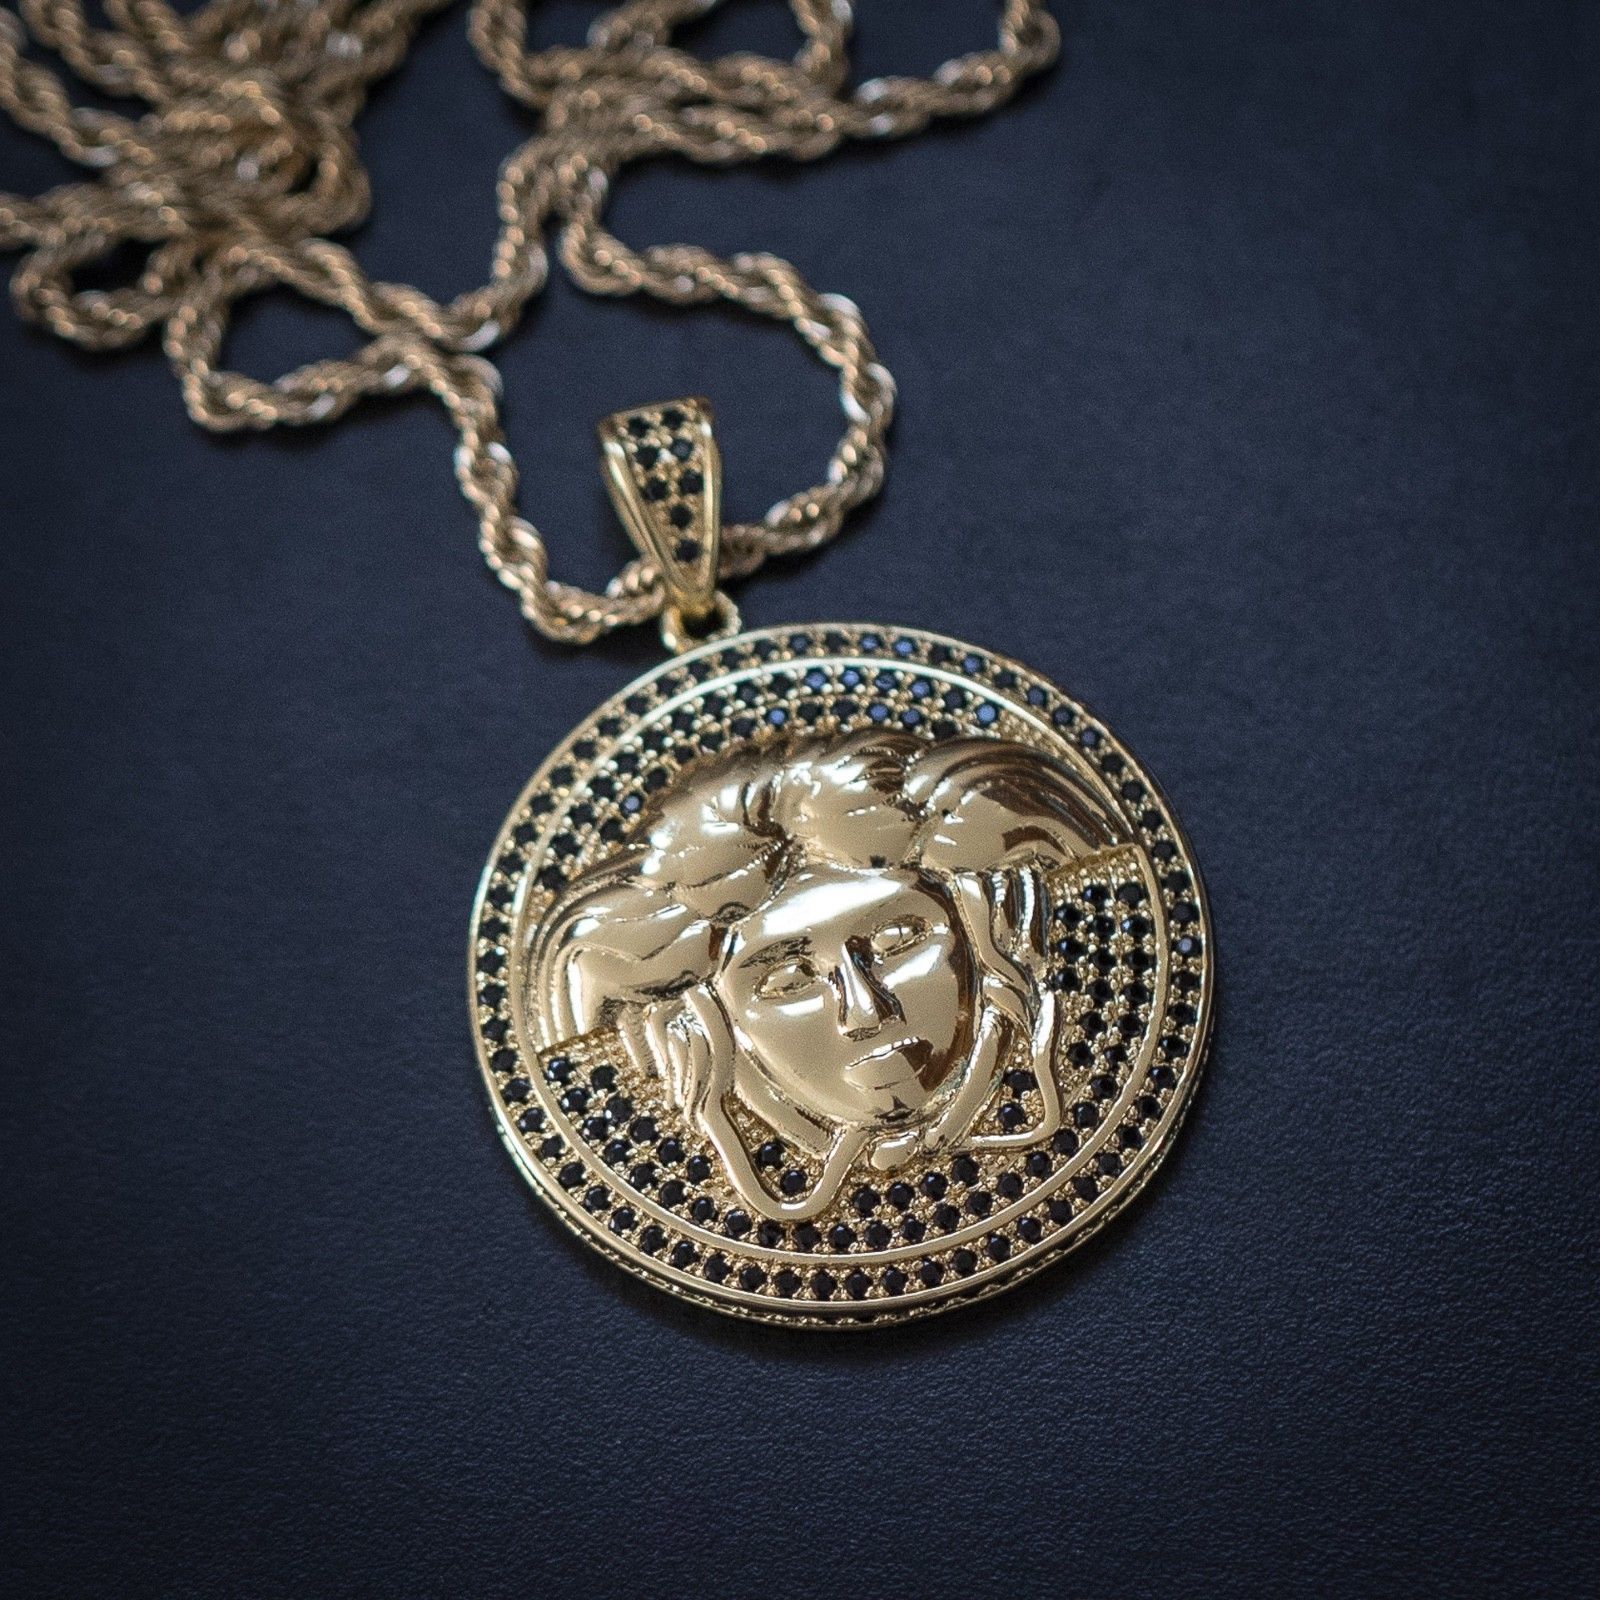 14K Gold Medusa Medallion Pendant With Rope Chain Necklace - Chains ...